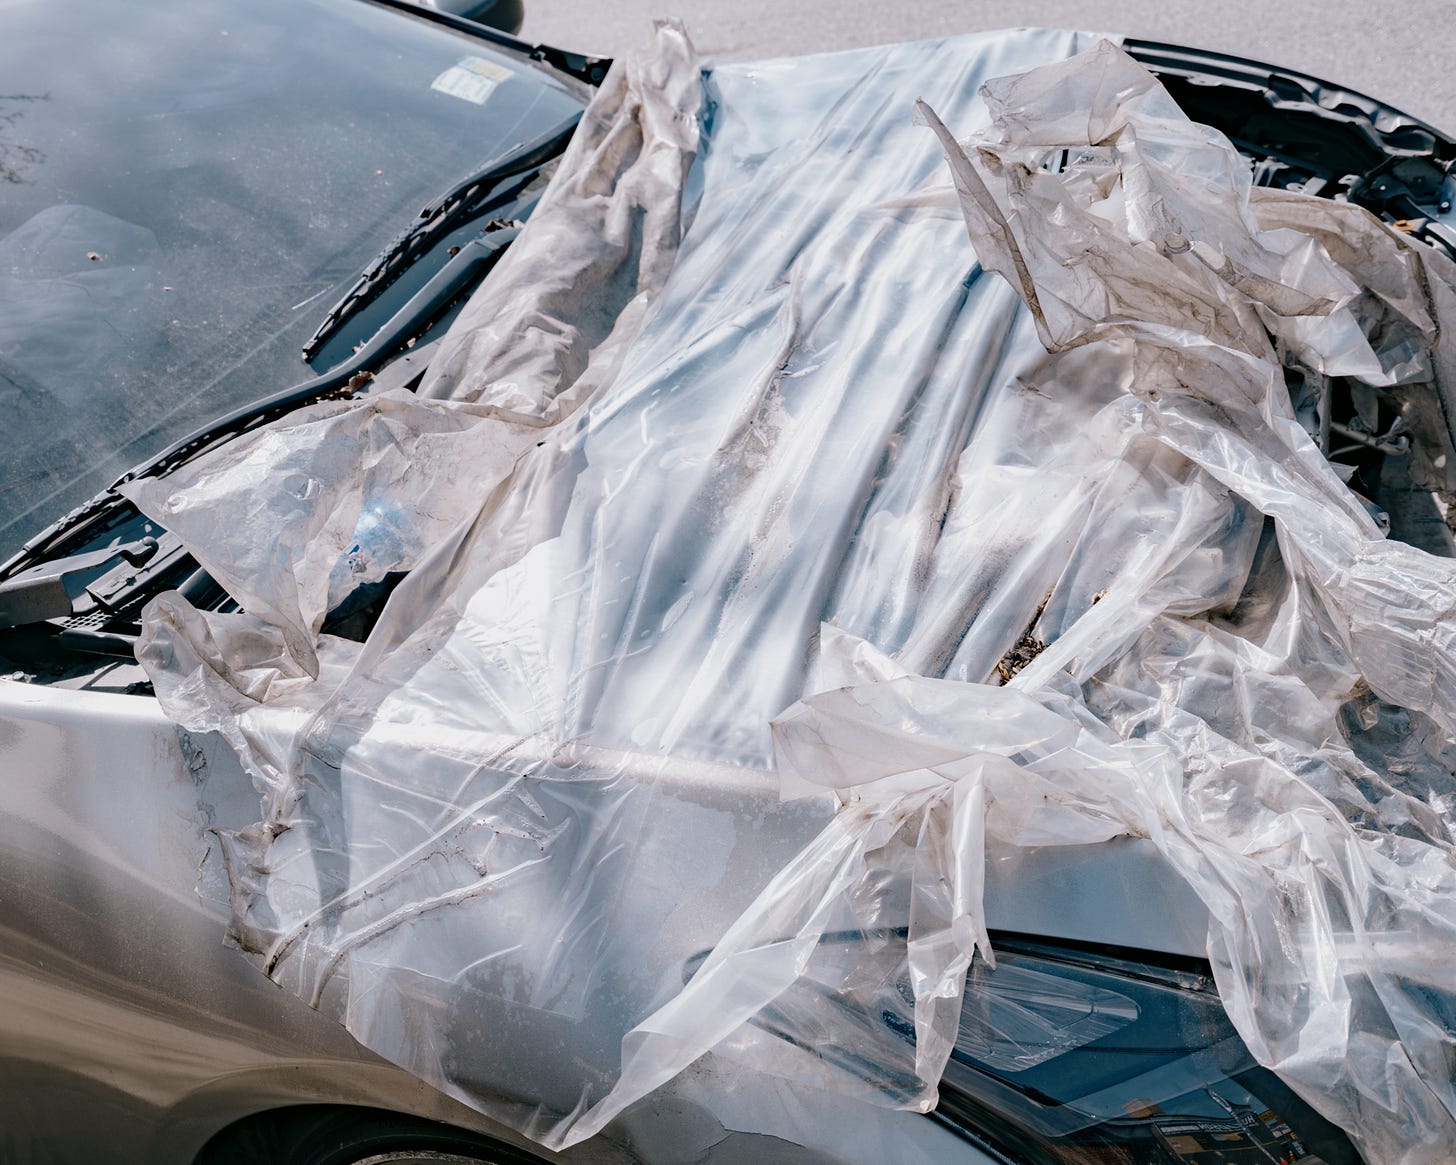 Plastic tarp covers exposed engine of wrecked car